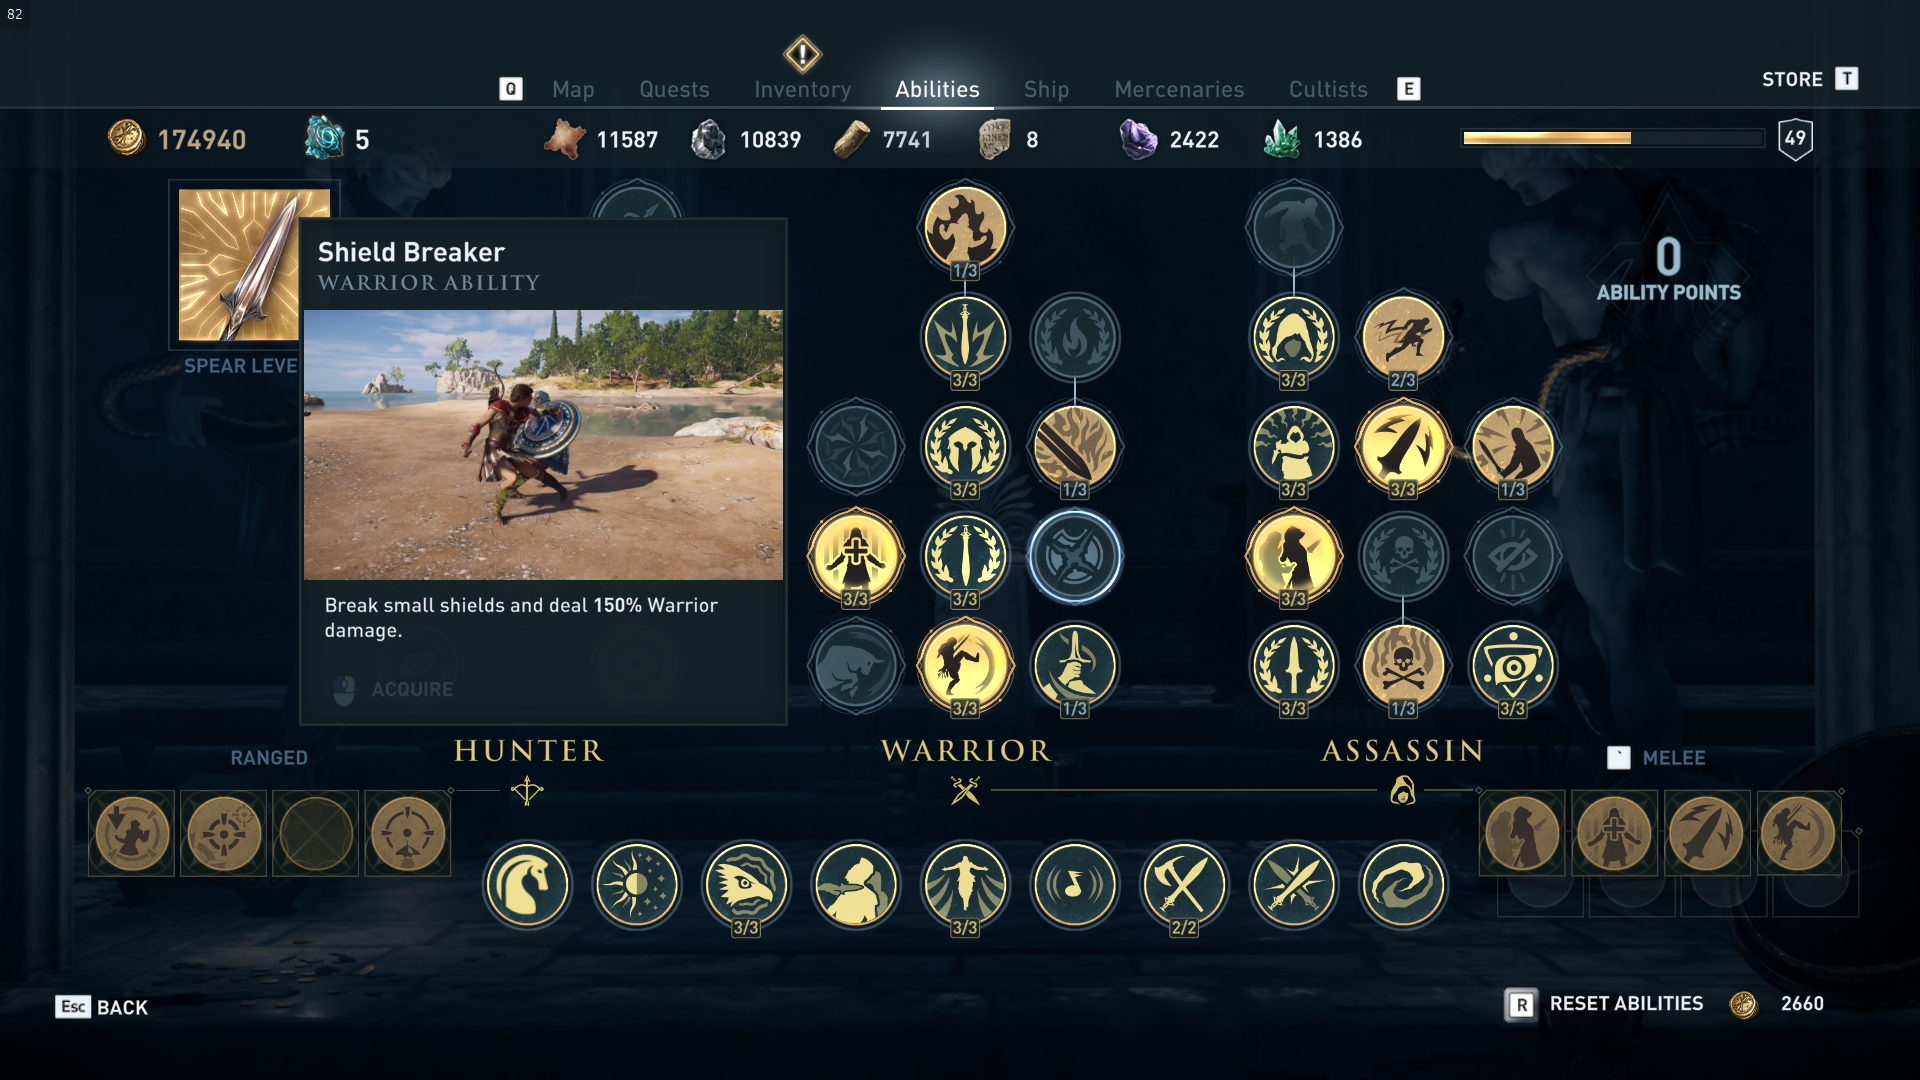 Interface Game on Twitter: "Assassin's Creed Odyssey Video game UI → https://t.co/d9FRN0FVOs #gameui #gamedev #indiedev #AssassinsCreed https://t.co/JFQ4XoYXT0" / Twitter